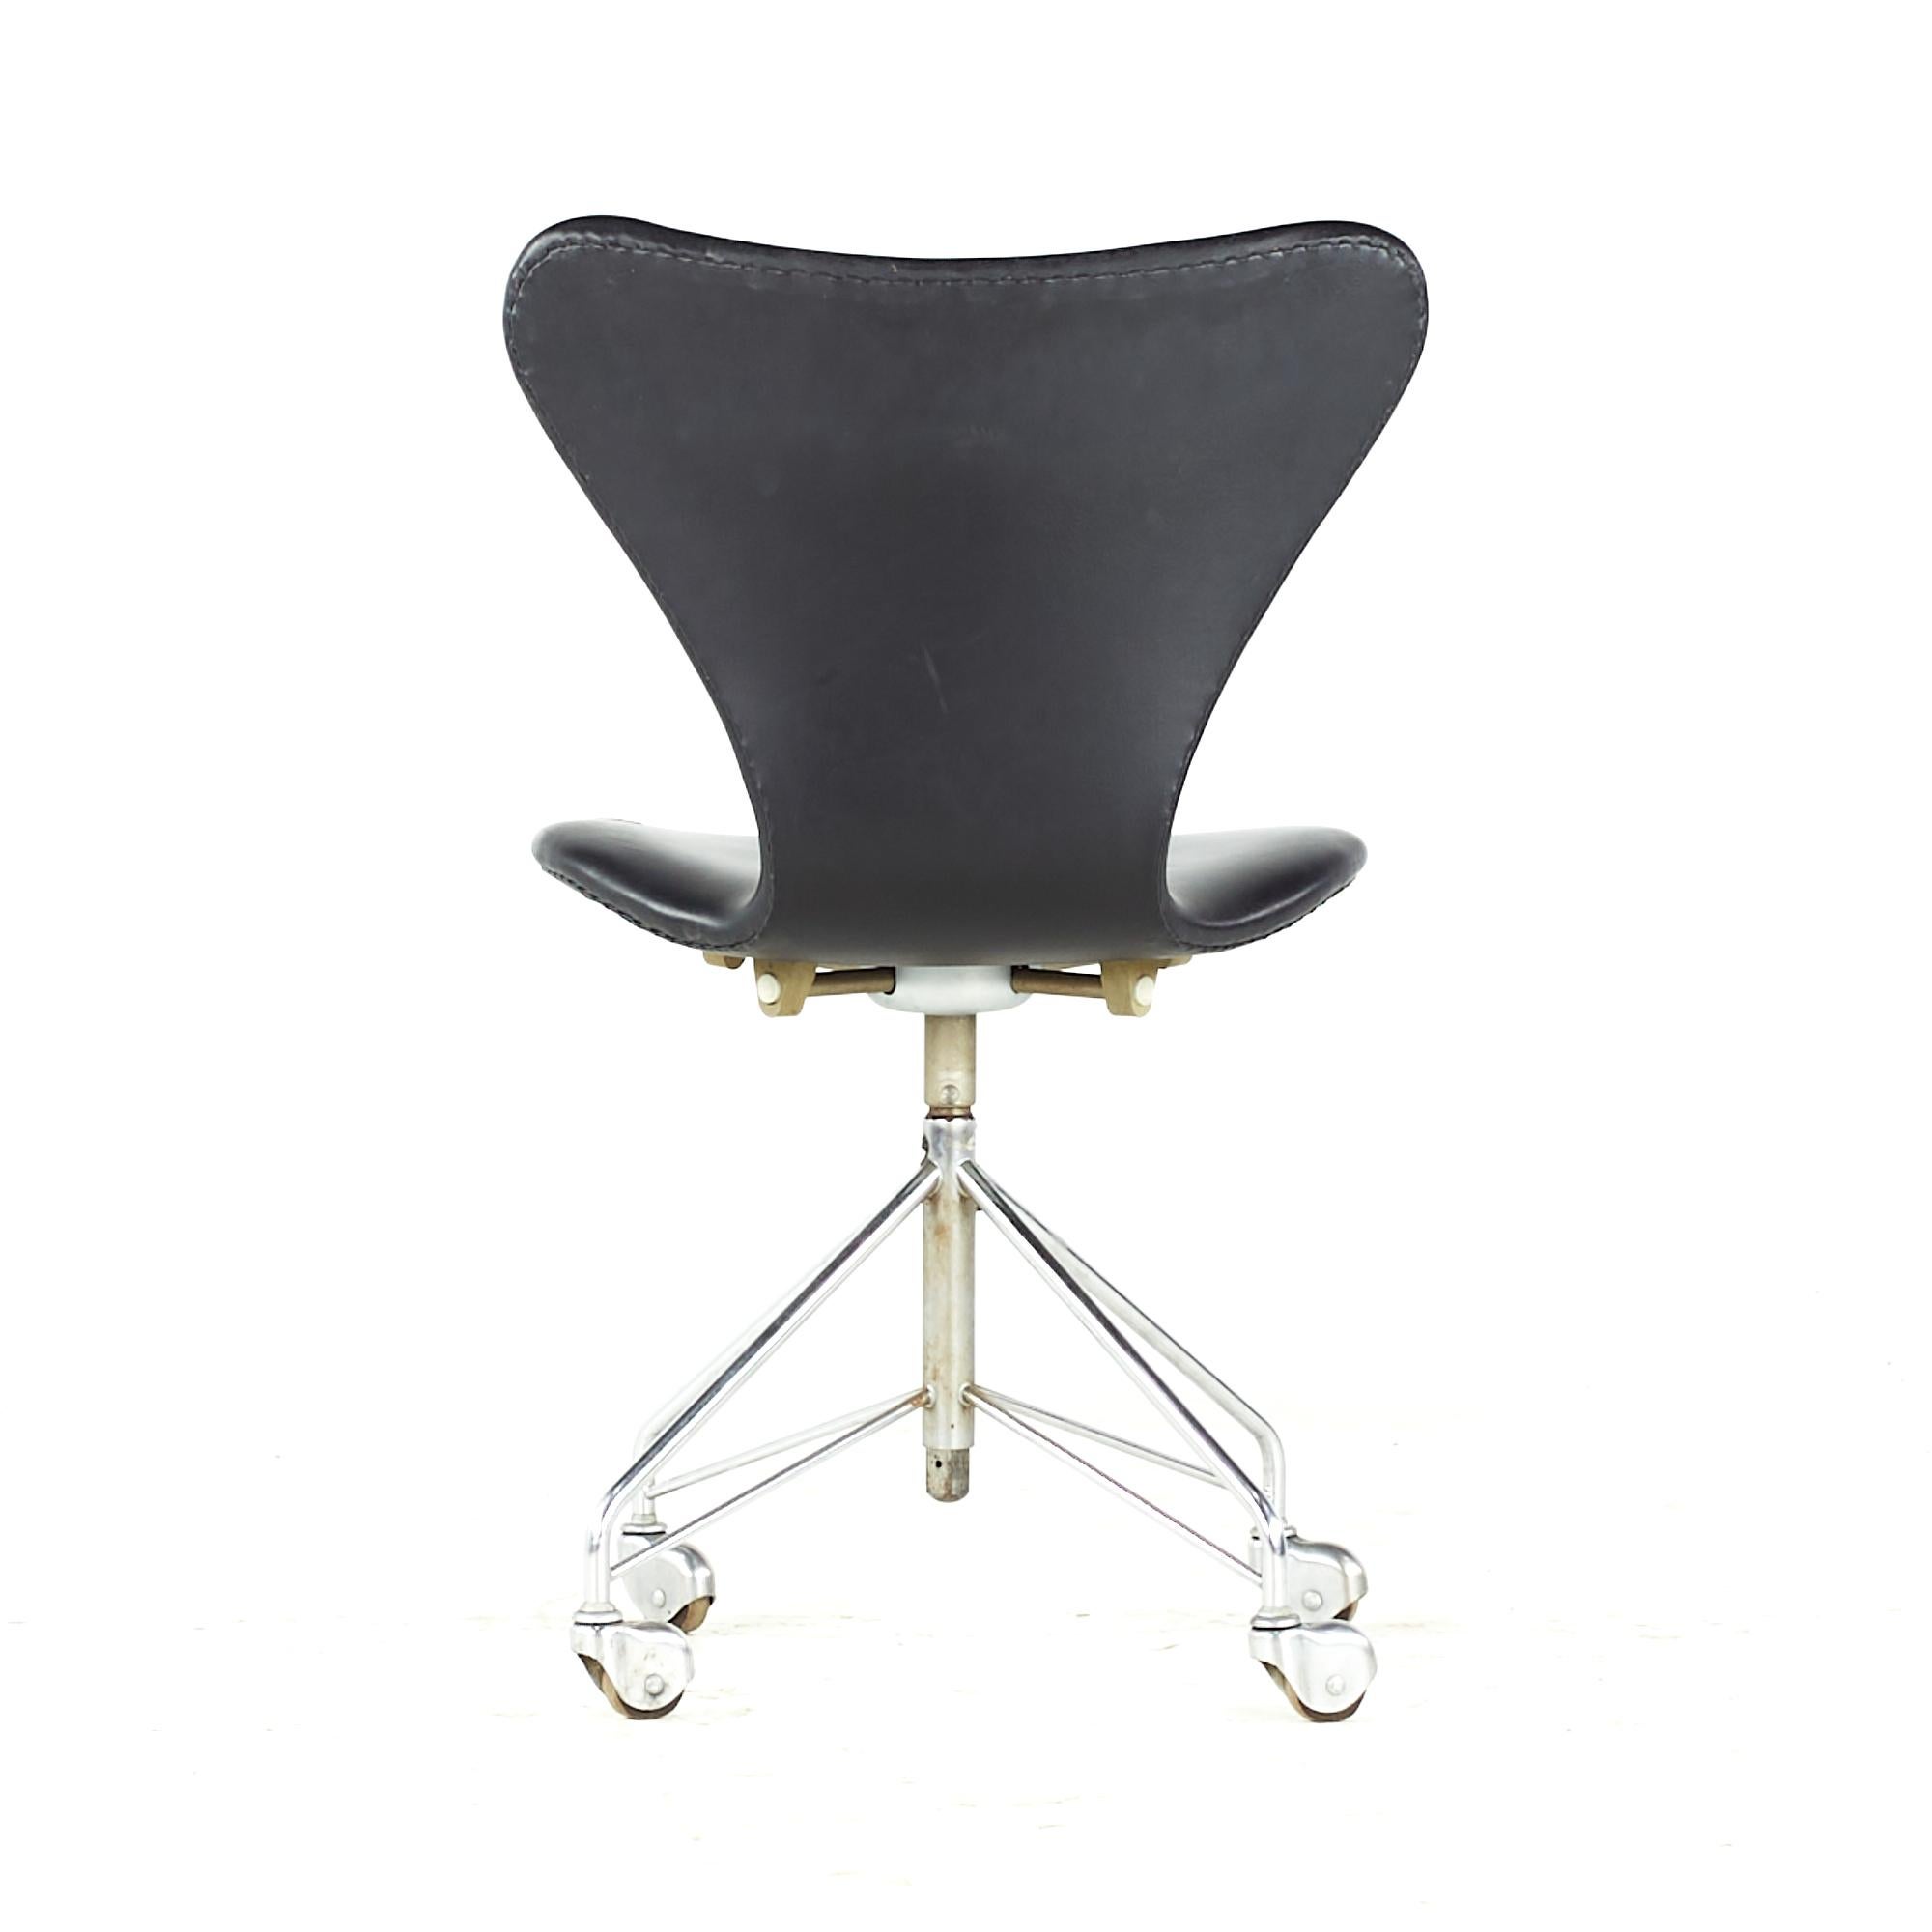 Arne Jacobsen Fritz Hansen Midcentury Wheeled Chair In Good Condition For Sale In Countryside, IL